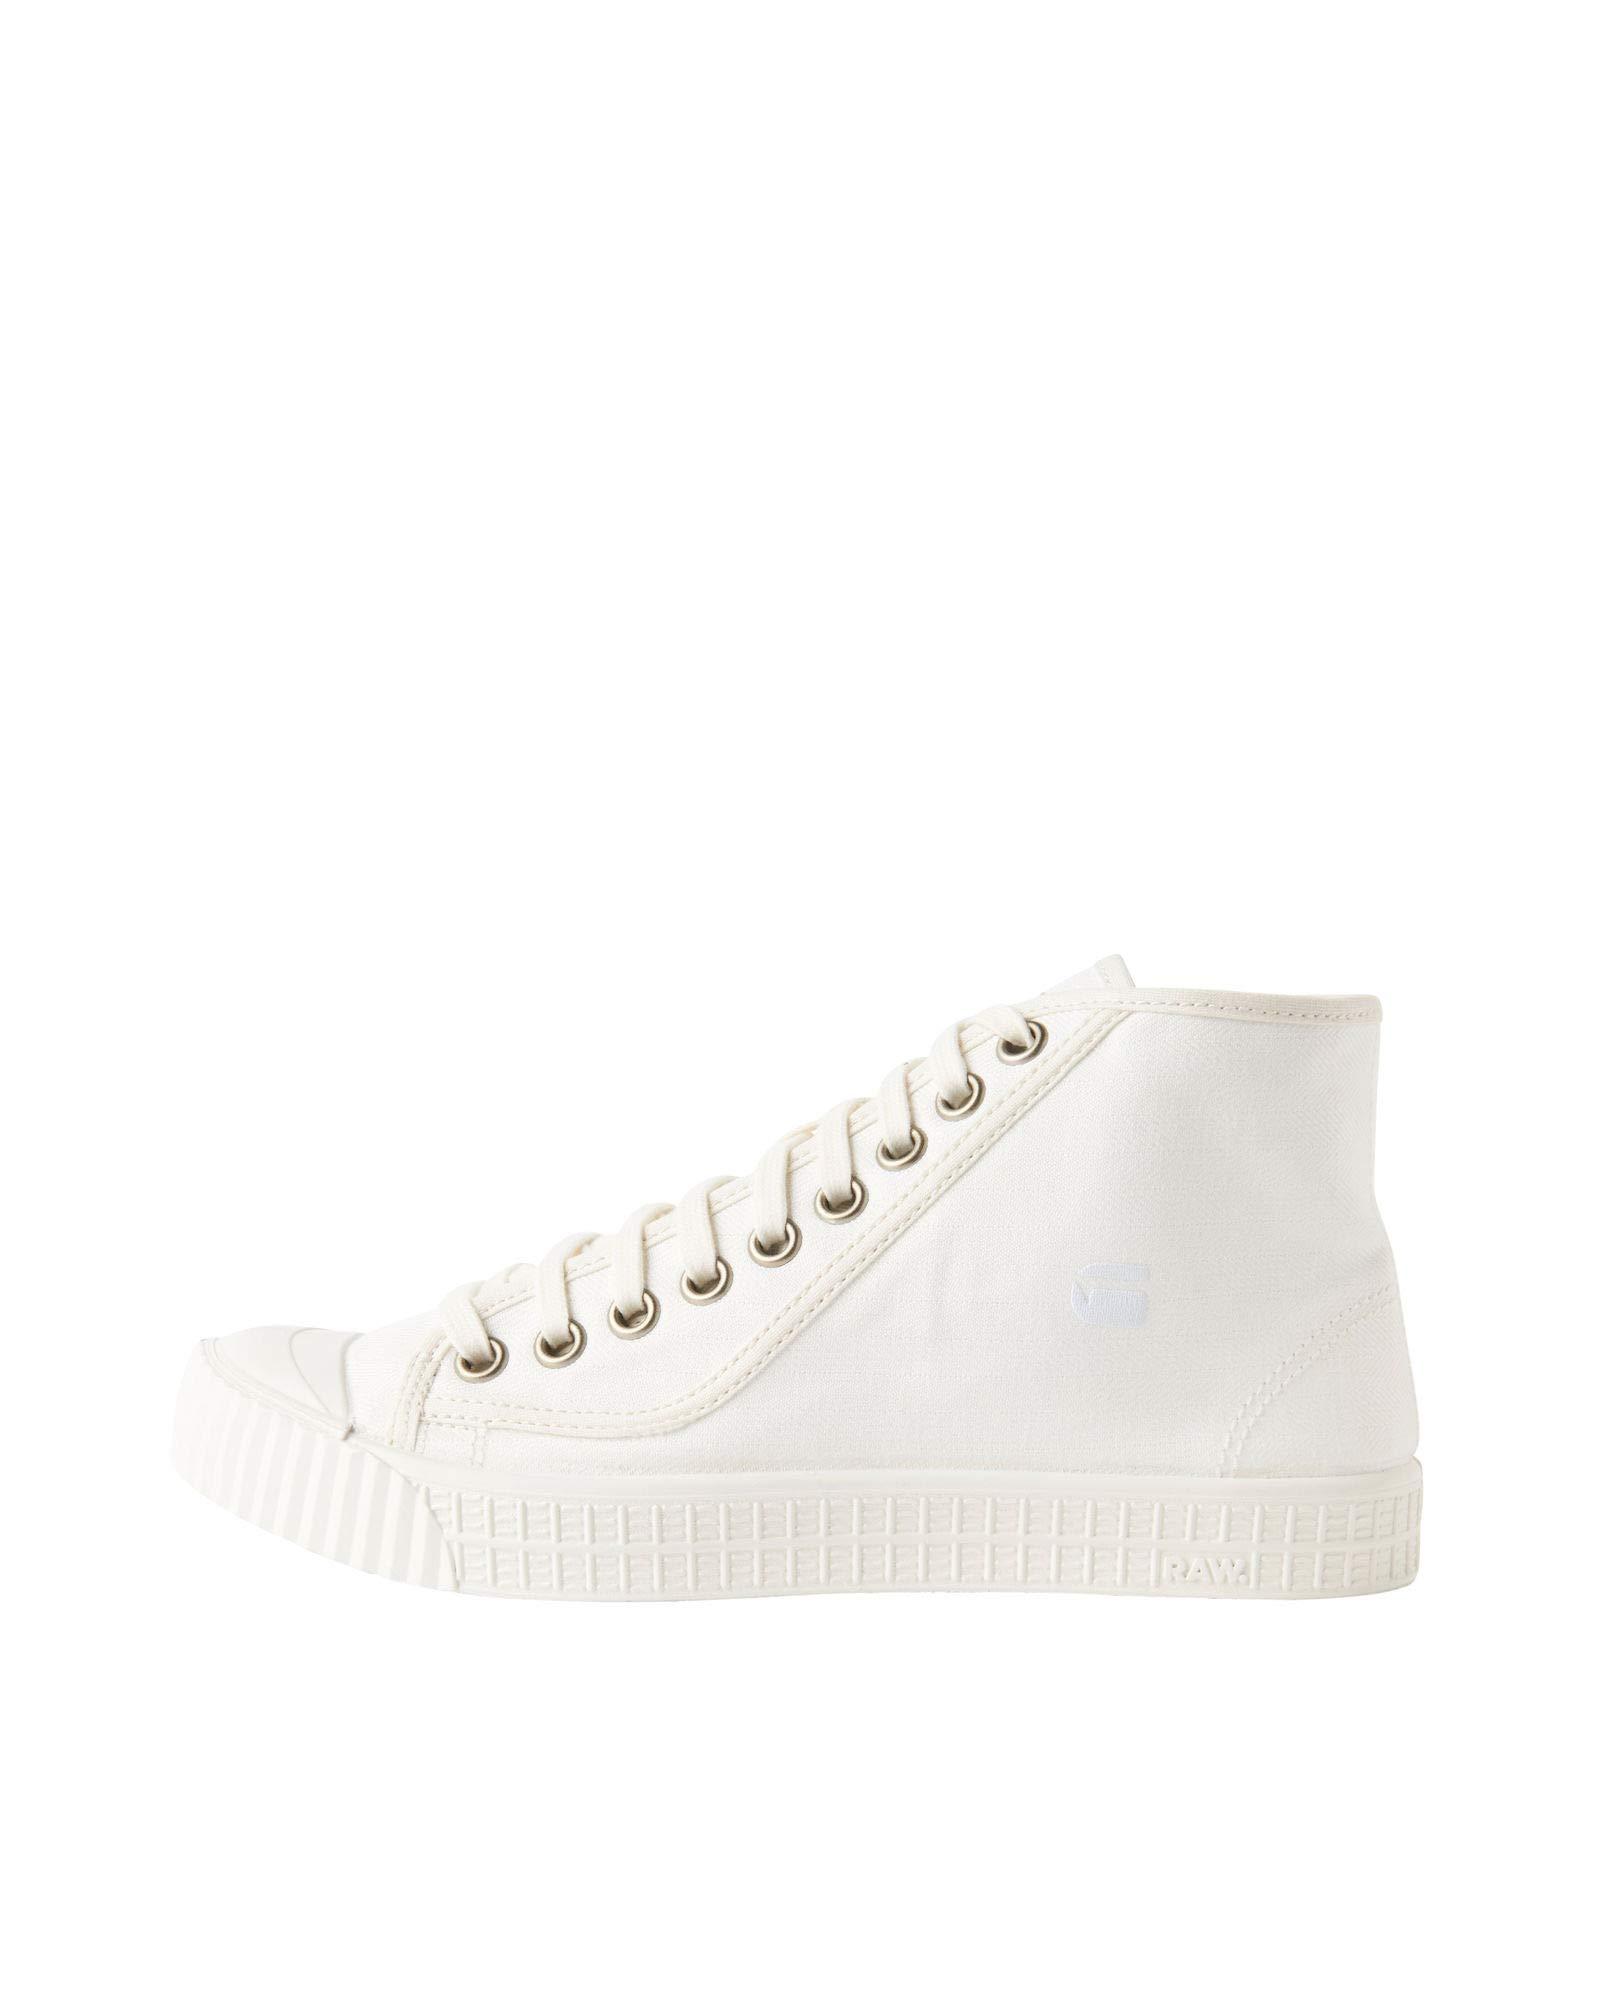 G-Star RAW Denim Rovulc Hb Low-top Sneakers in White for Men - Save 29% -  Lyst